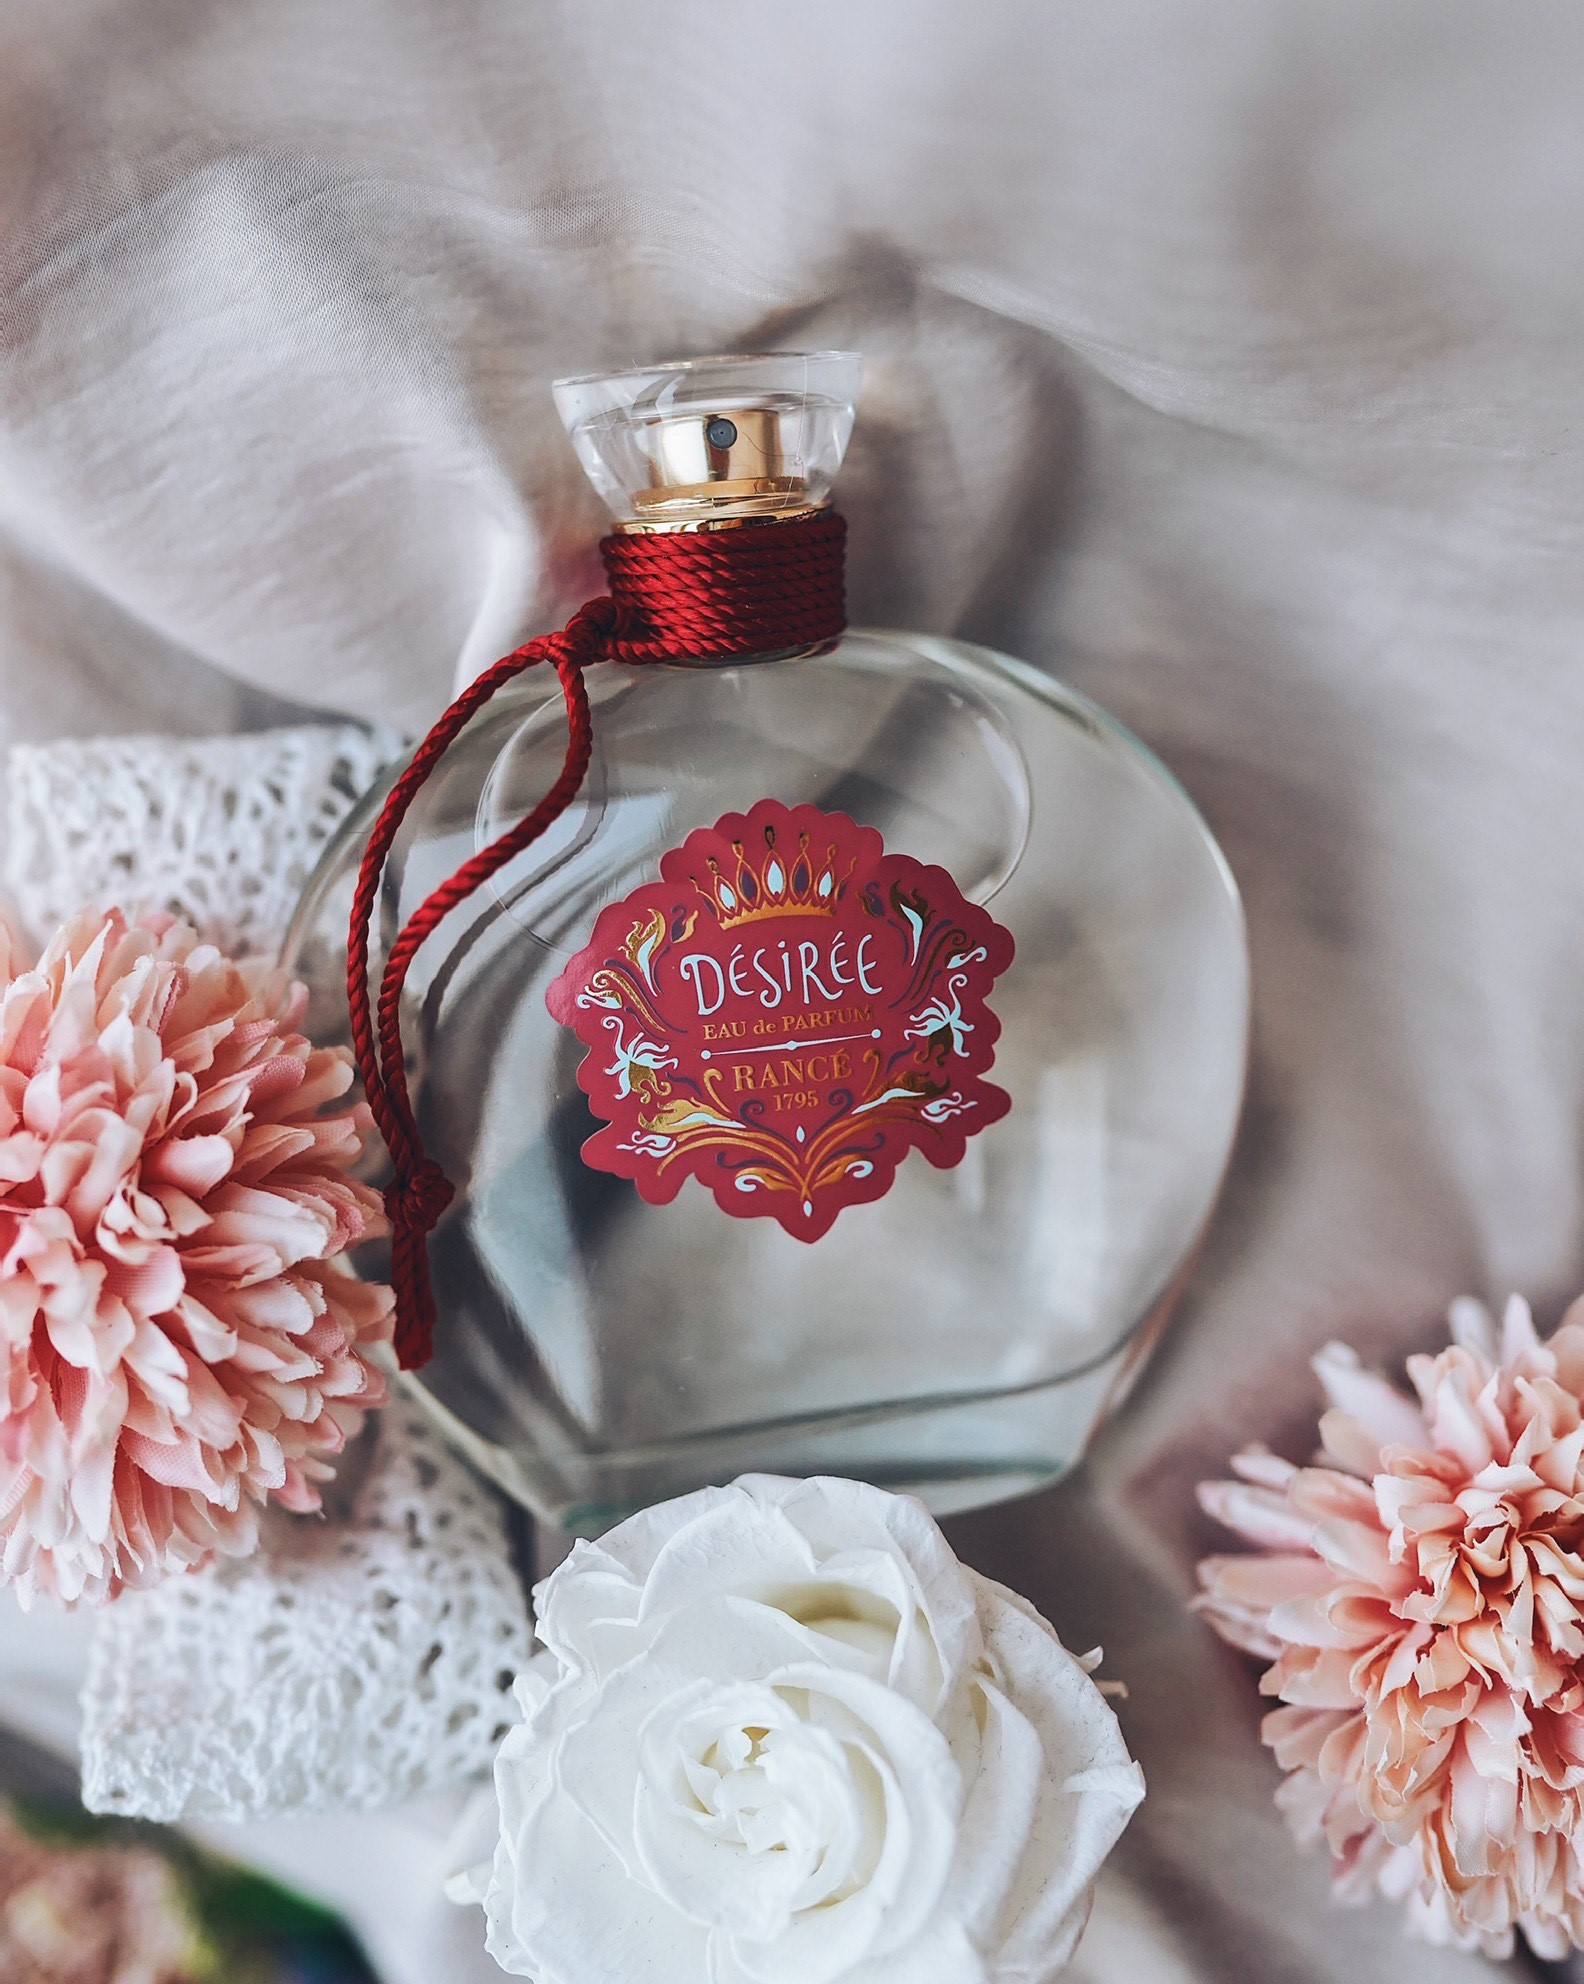 Of sneaked kisses and springtime scents: Désirée according to Ade Scents